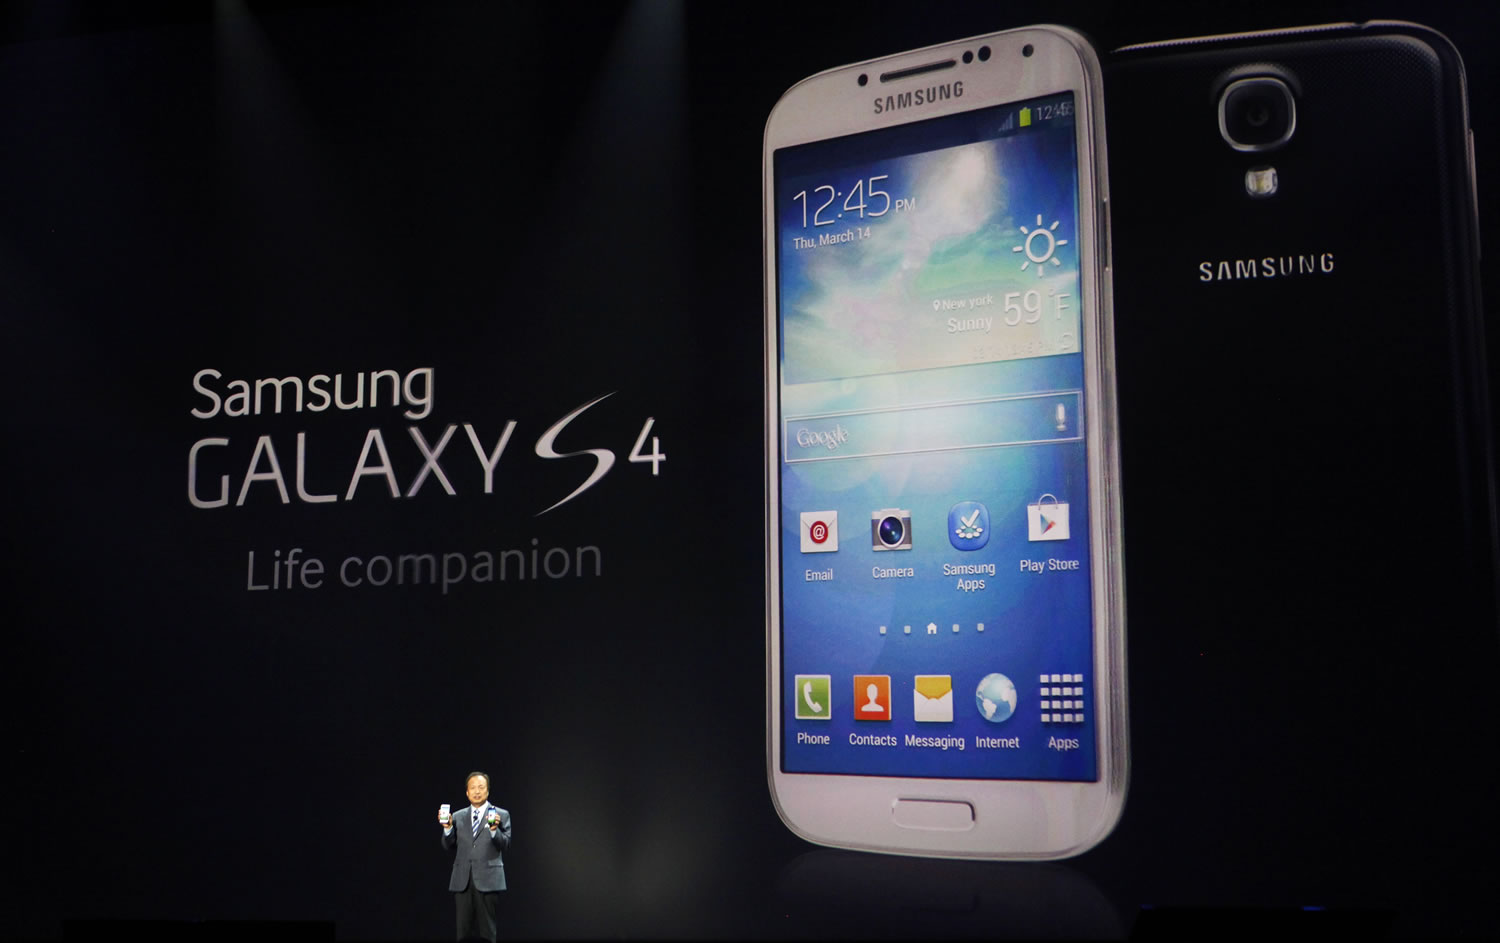 JK Shin, president and head of IT and Mobile Communications for Samsung Electronics, presents the new Samsung Galaxy S 4 during the Samsung Unpacked event at Radio City Music Hall on Thursday in New York.